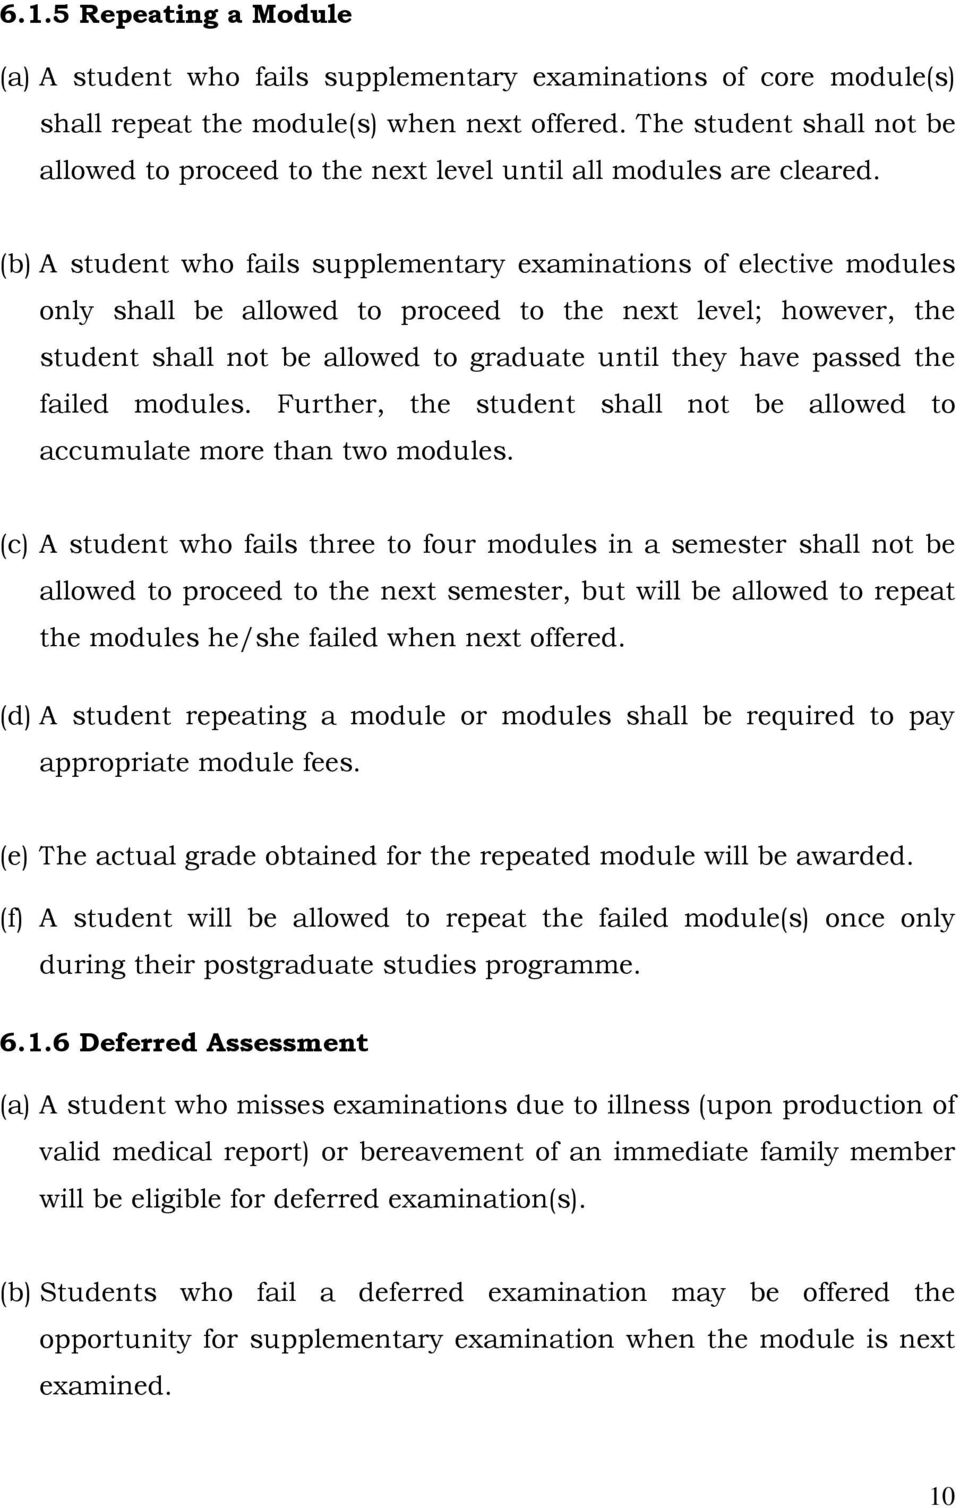 (b) A student who fails supplementary examinations of elective modules only shall be allowed to proceed to the next level; however, the student shall not be allowed to graduate until they have passed